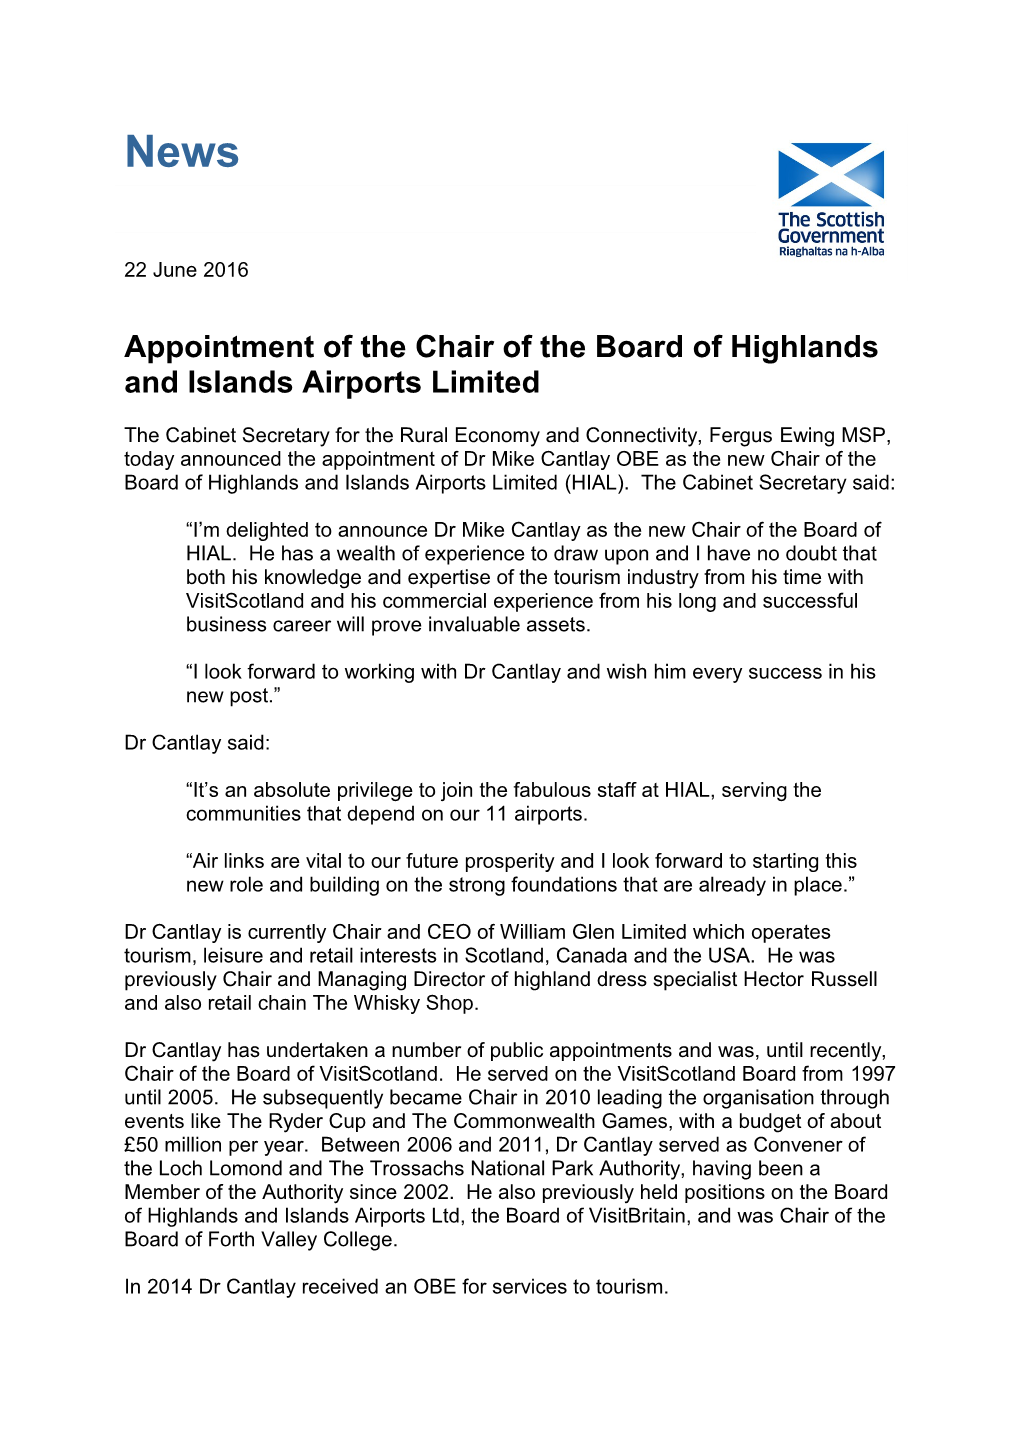 Appointment of the Chair of the Board of Highlands and Islands Airports Limited